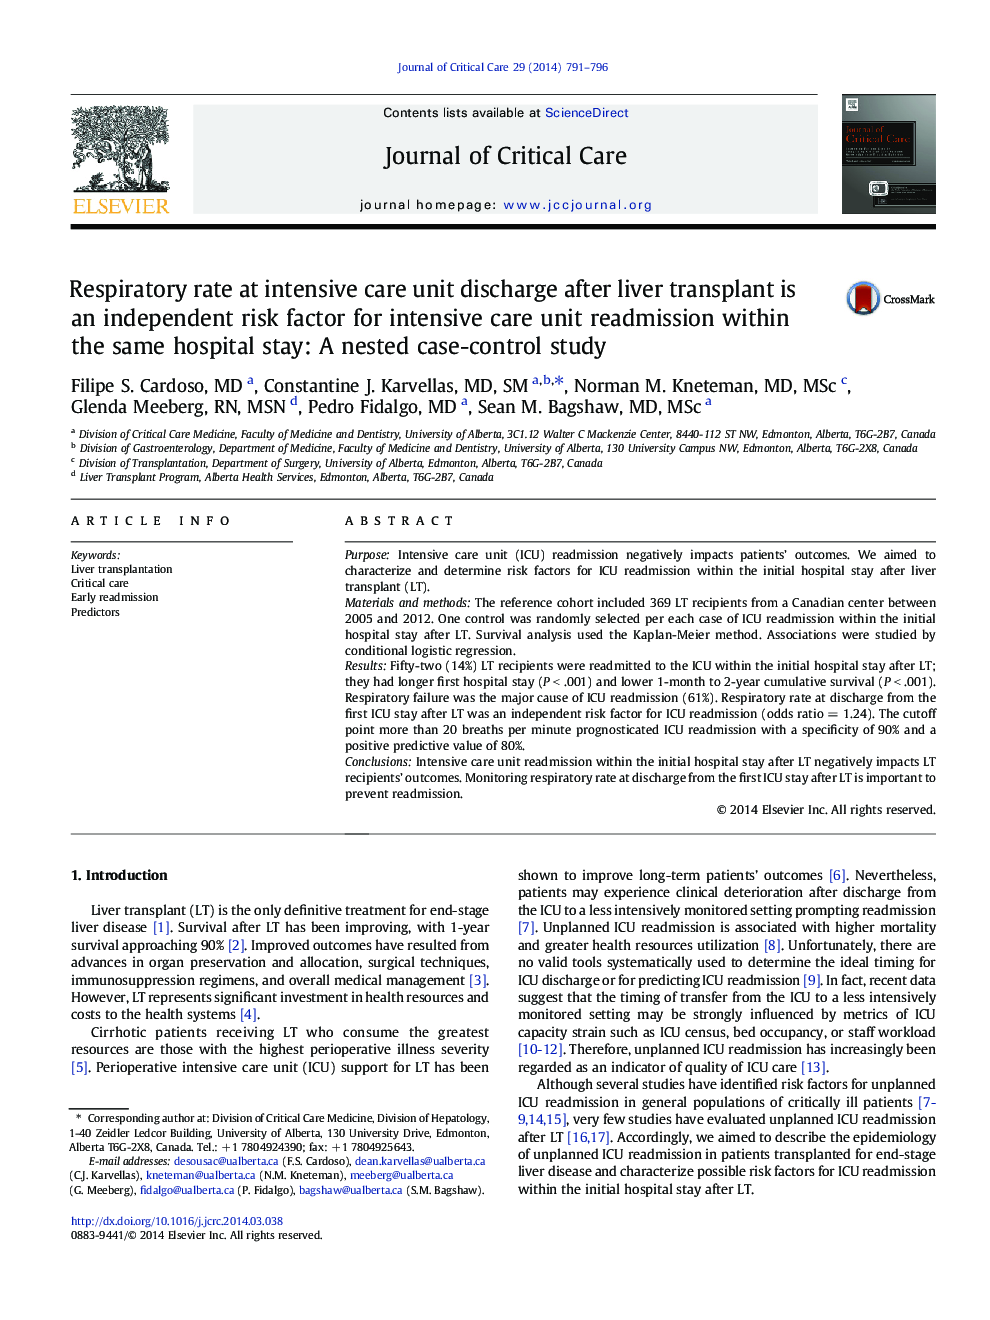 Respiratory rate at intensive care unit discharge after liver transplant is an independent risk factor for intensive care unit readmission within the same hospital stay: A nested case-control study